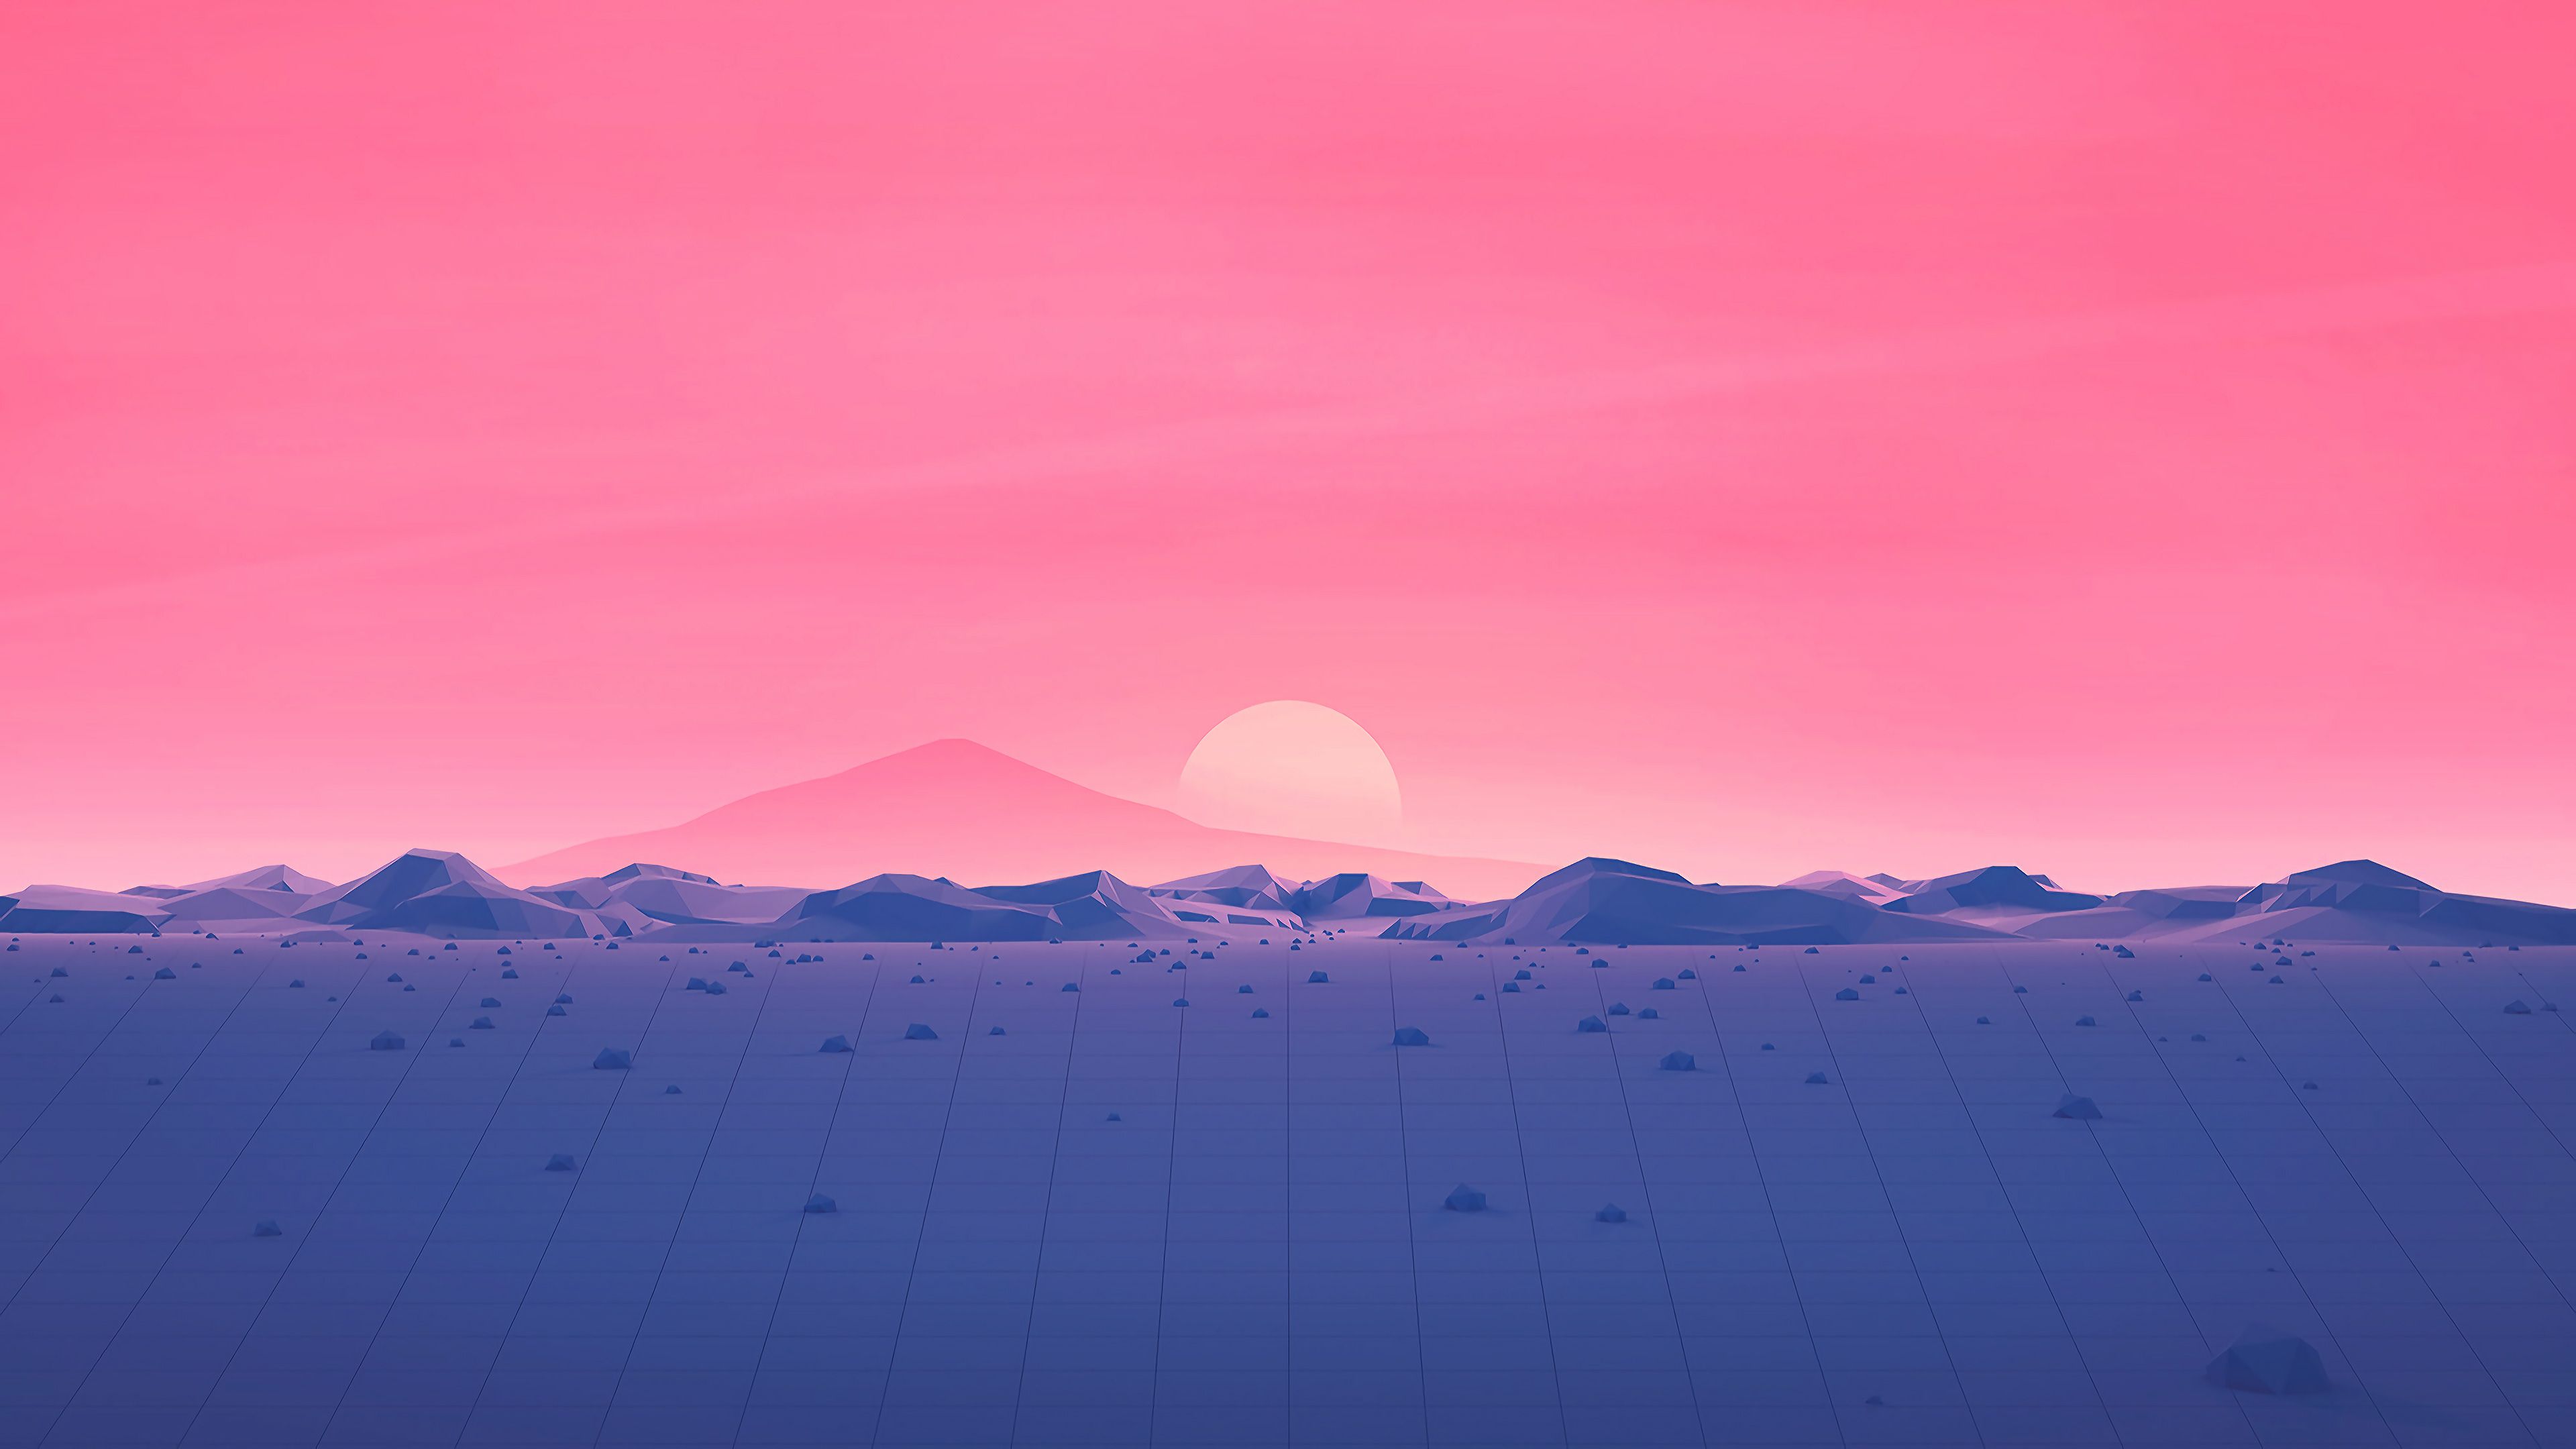 3D illustration of a futuristic landscape with low poly style mountains and the sun - Sunrise, low poly